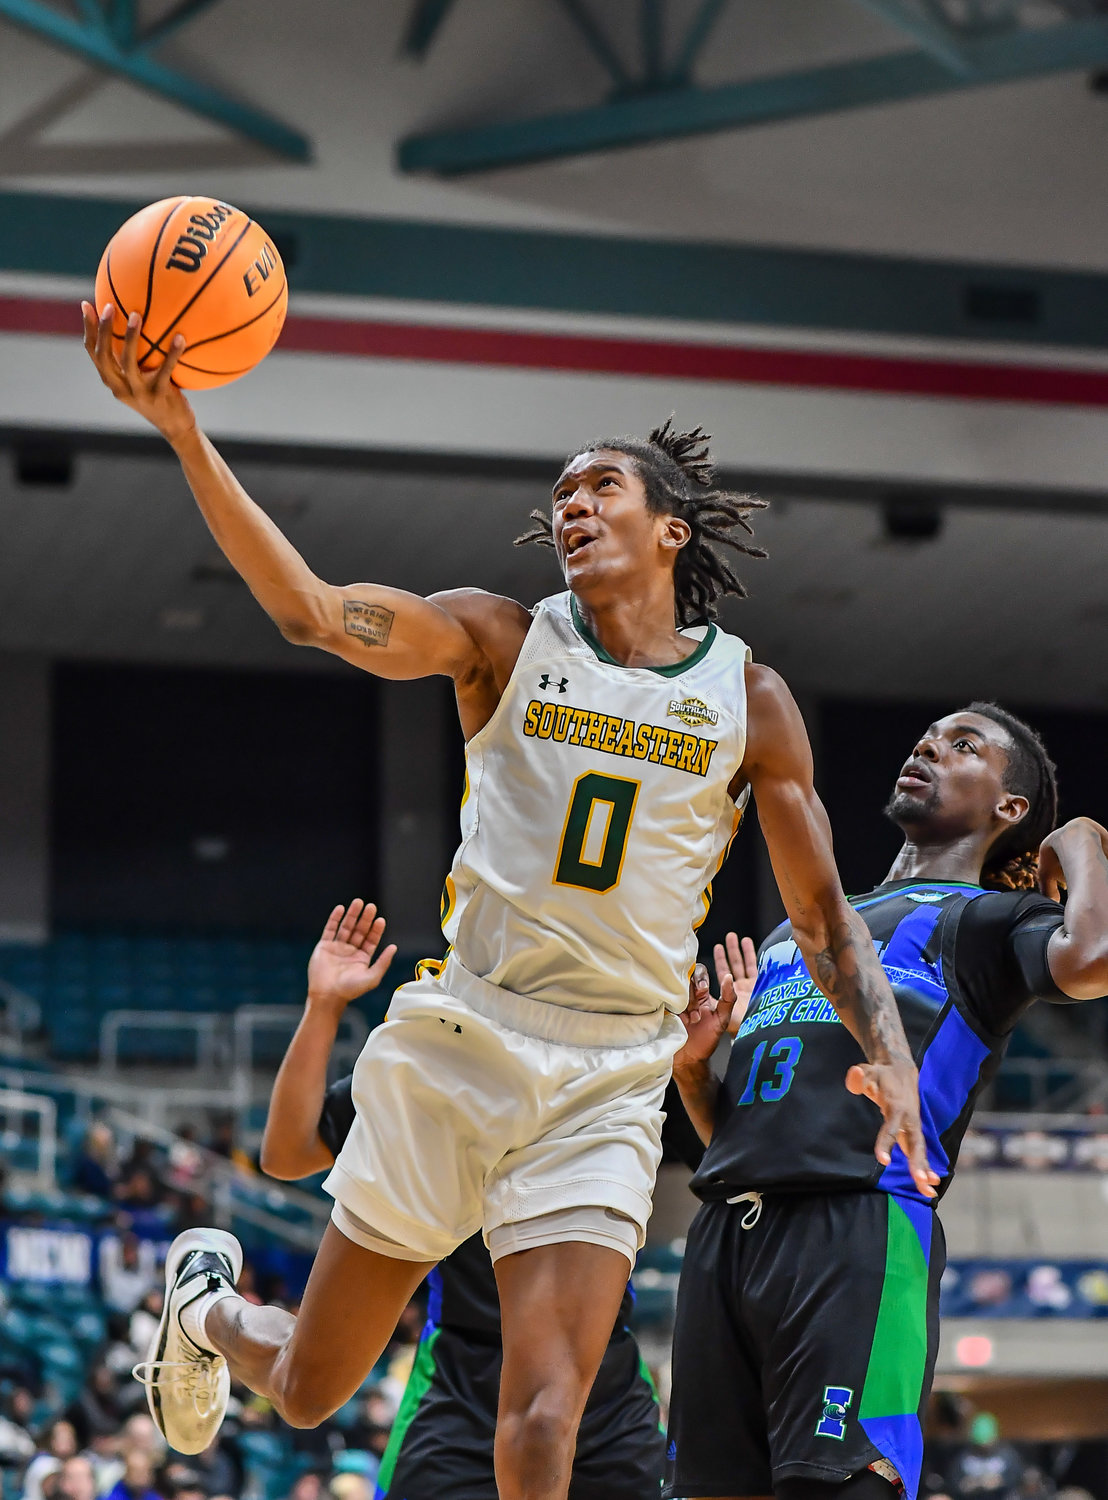 March 12,, 2022:  Southeastern Louisianas Jalyn Hinton #0 drives up to the basket during the Southland Conference Basketball Championship game between A&M Corpus Christi vs Southeastern Louisiana. (Photo by Mark Goodman / Katy Times)